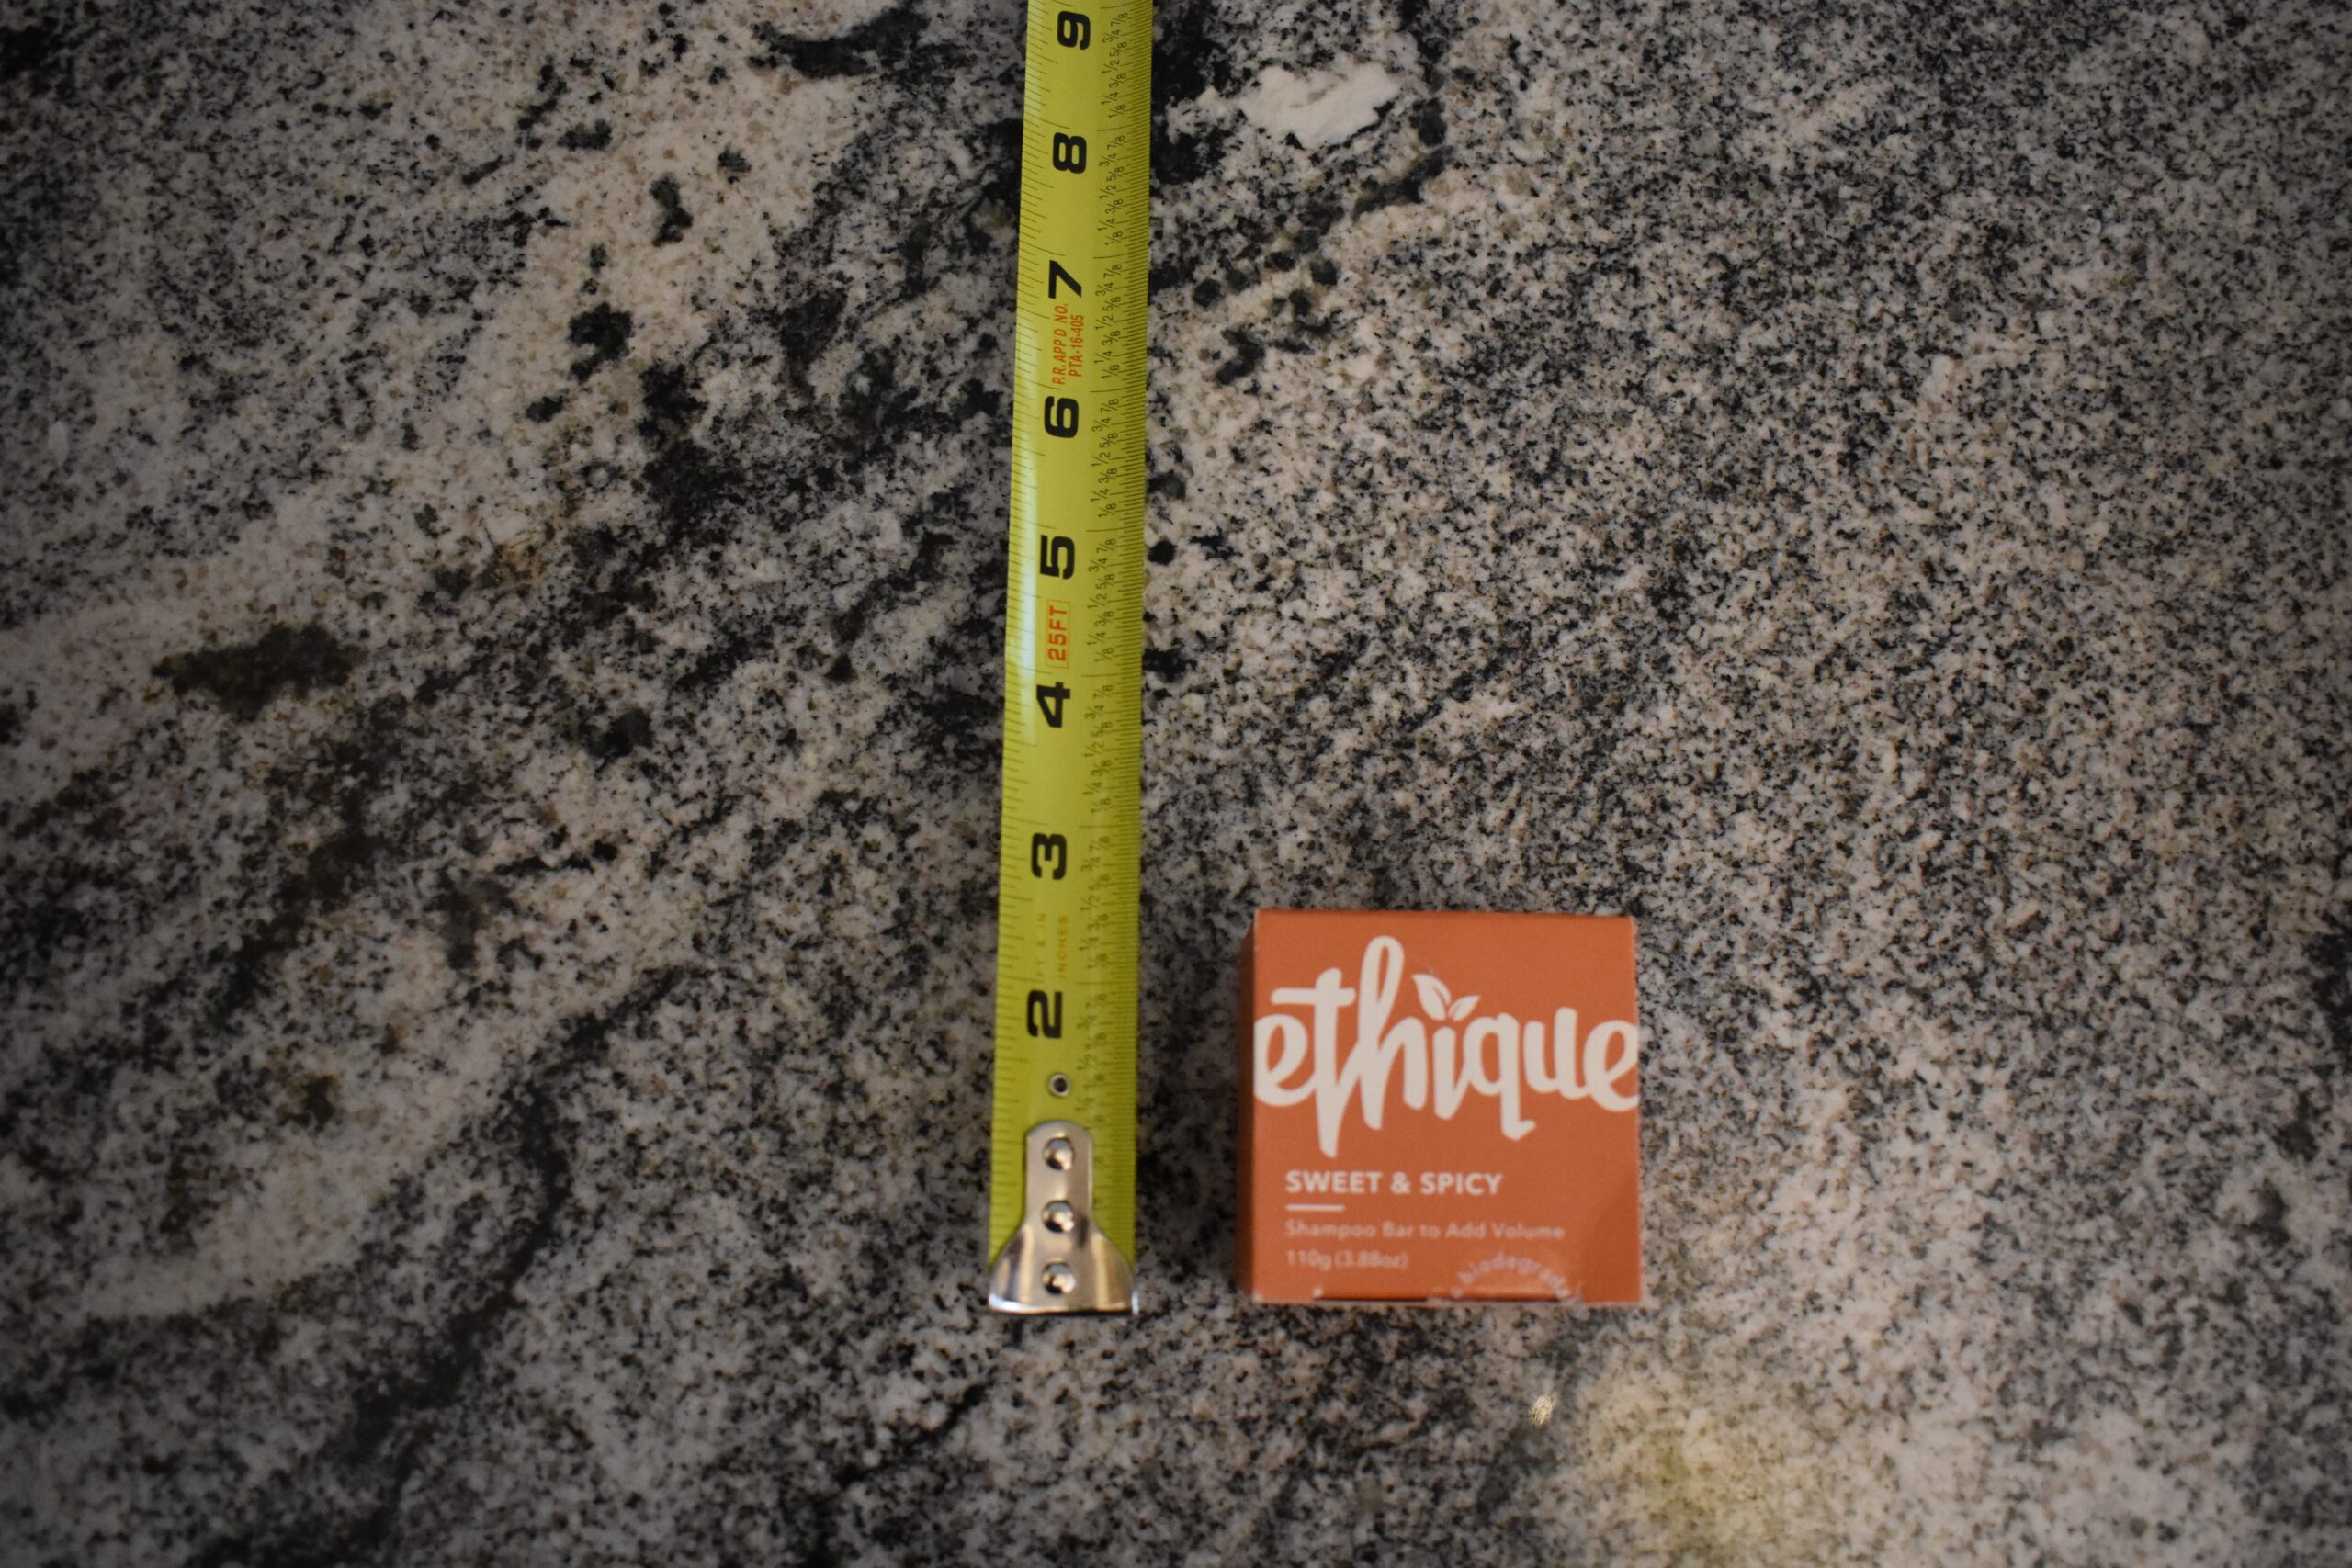 Ethique eco-friendly shampoo bar (one of our top shampoo picks) on the counter next to a tape measure